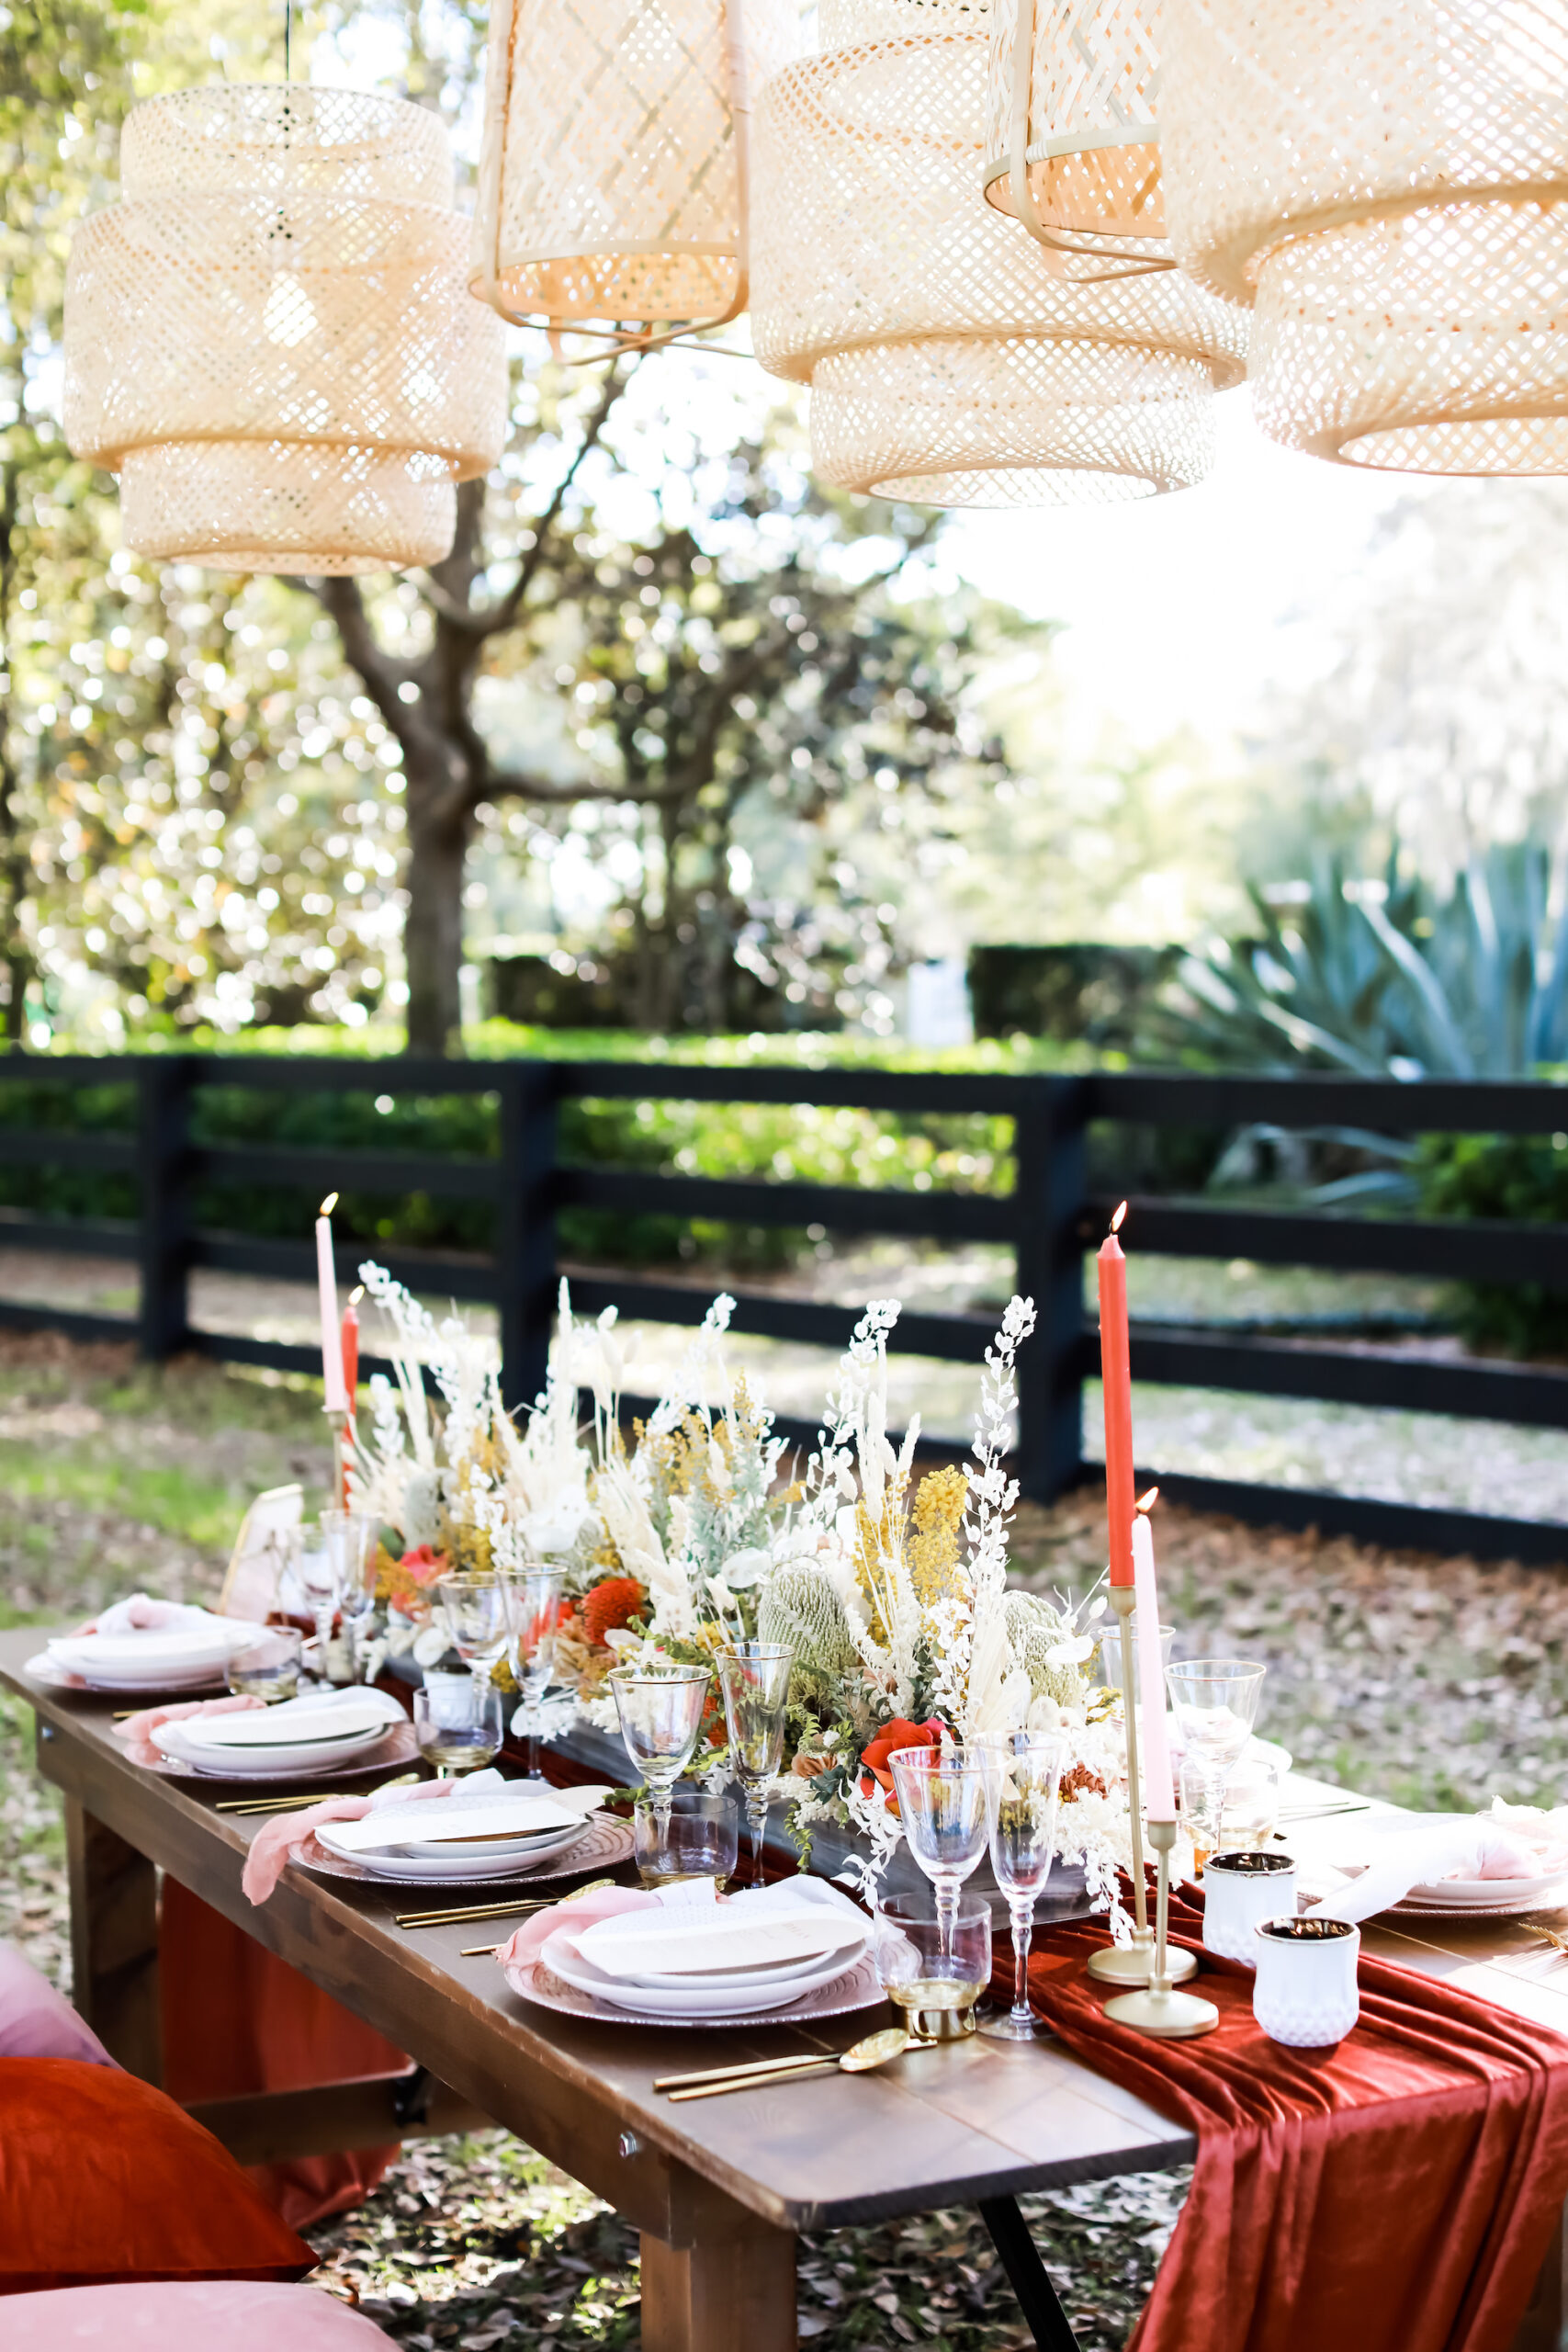 Boho Styled Wicker Lanterns Outdoor Wedding Decor Inspiration Boho Picnic with and Fall Reception Tablescape with Wooden Farm Table and Benches Centerpiece Inspiration | Tampa Bay Rentals Gabro Event Services